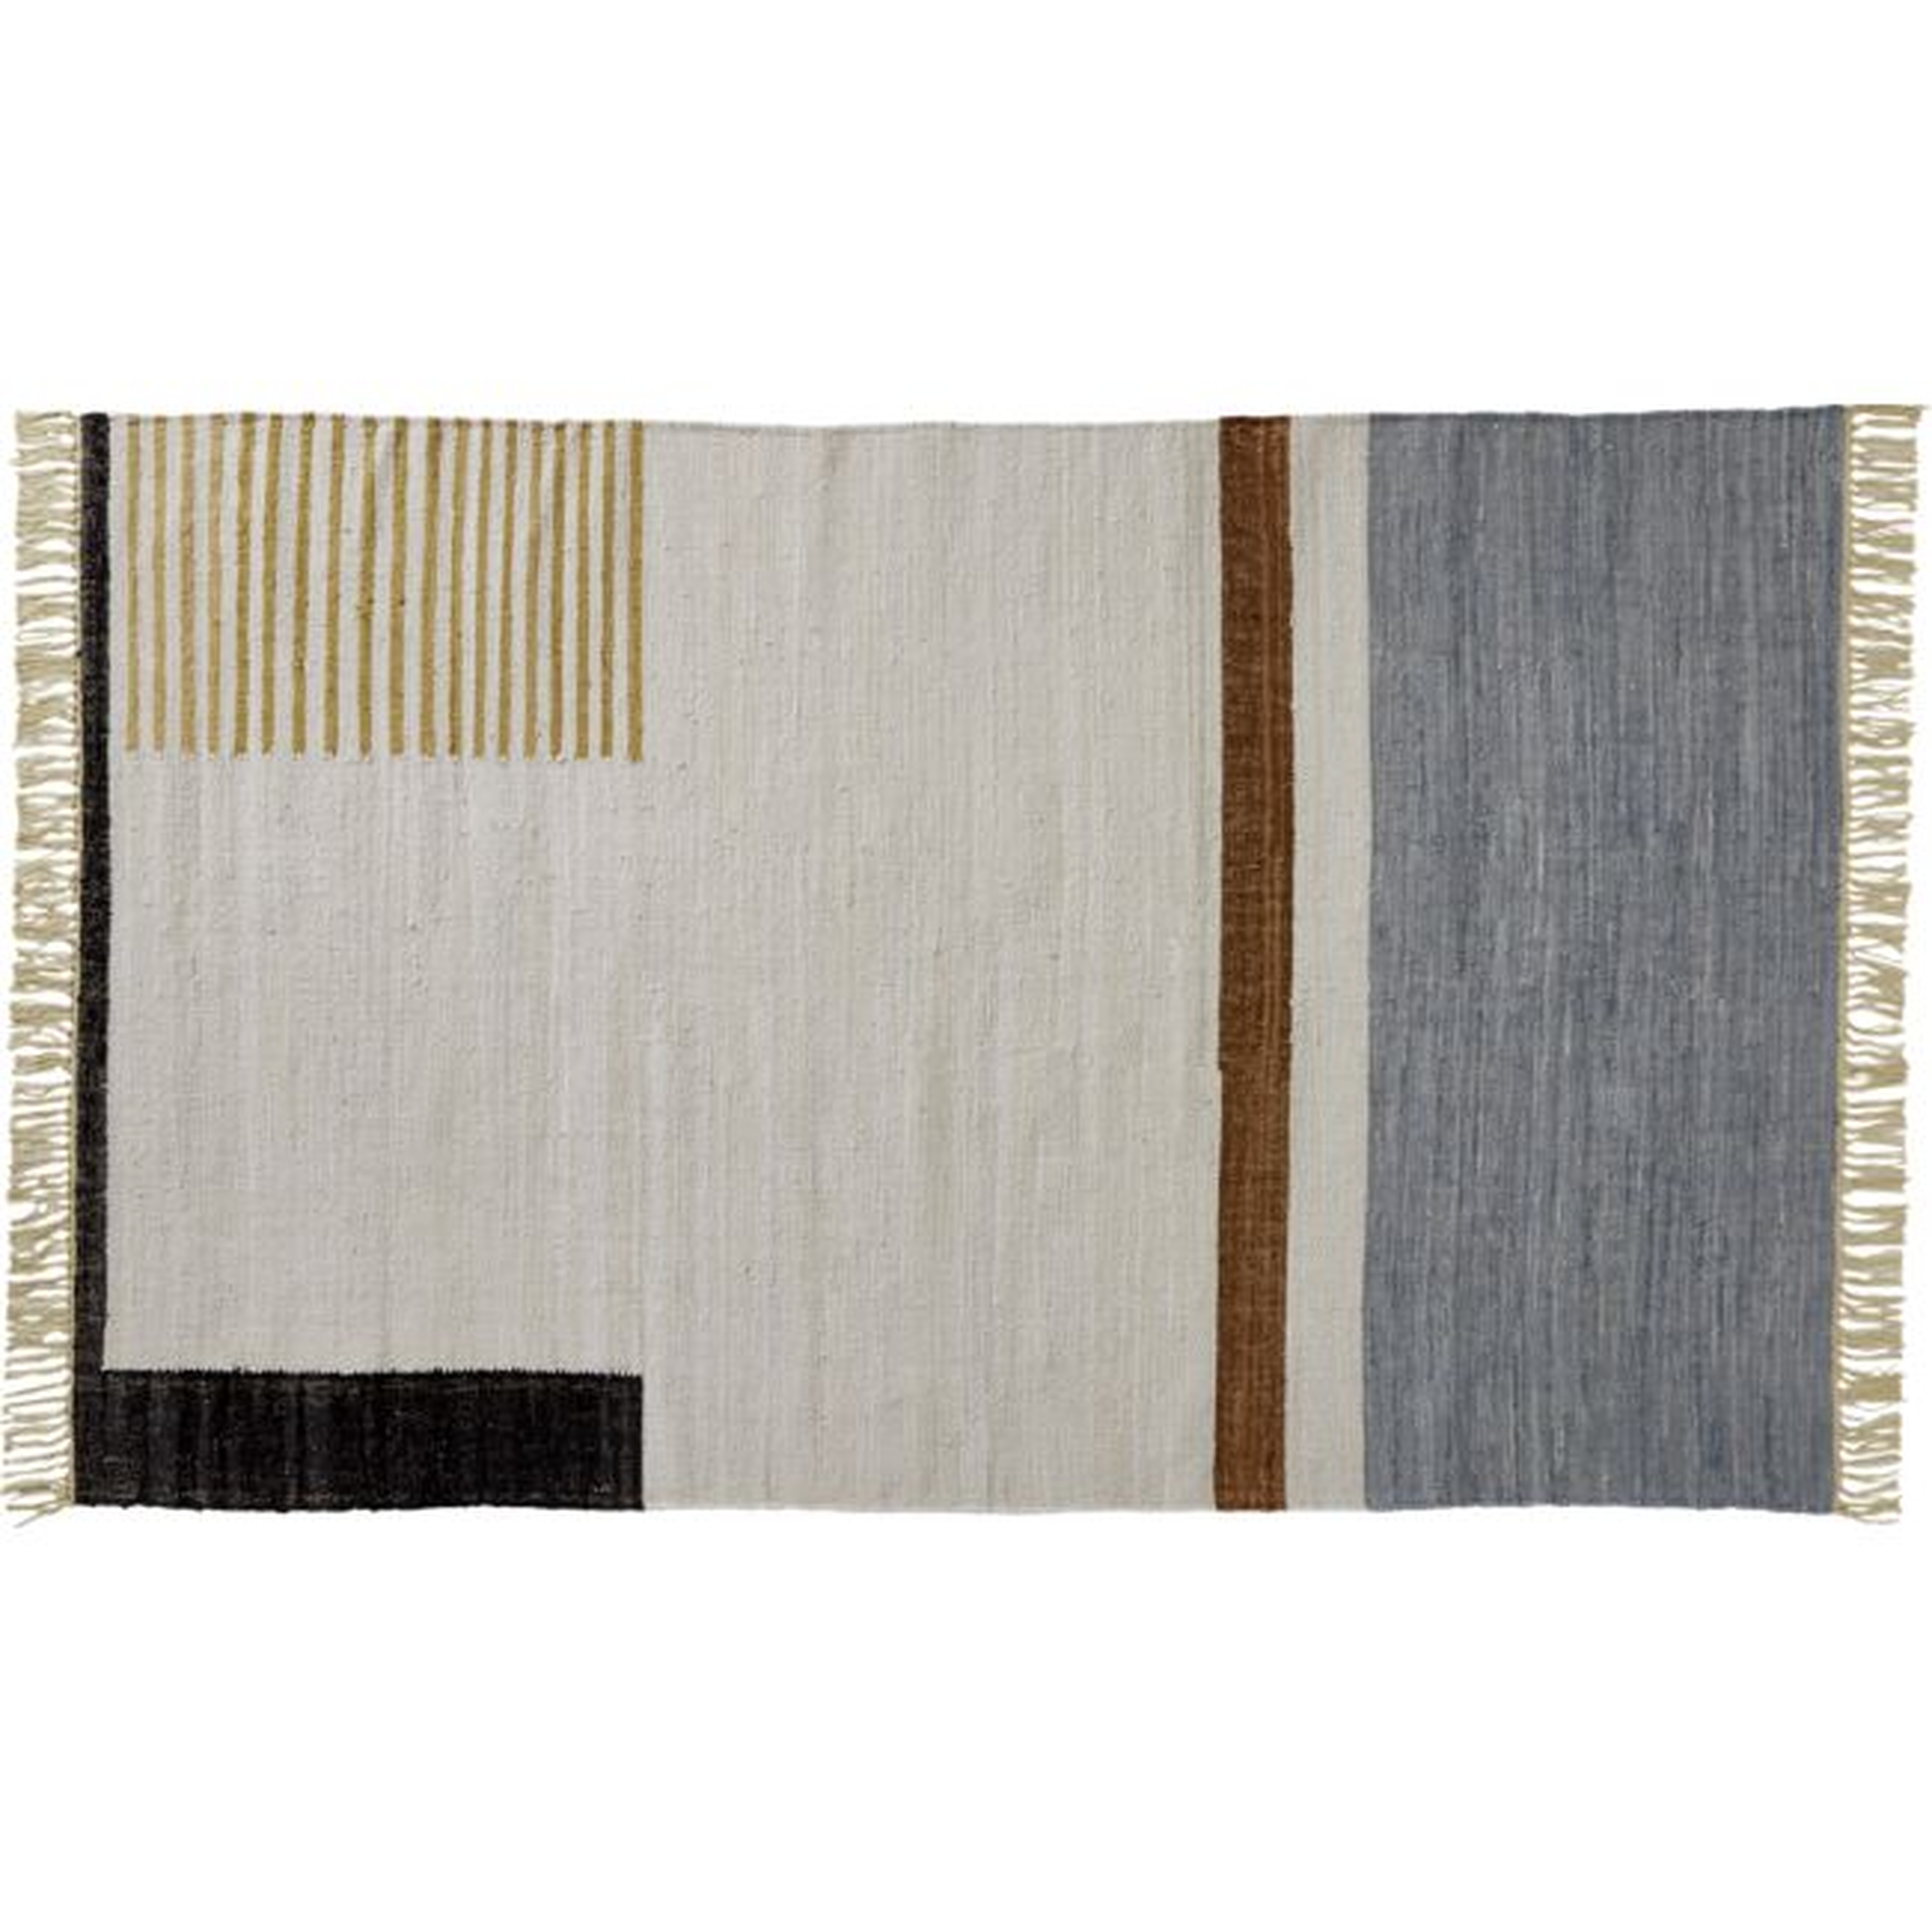 Array Handwoven Recycled Rug 5'x8' - CB2